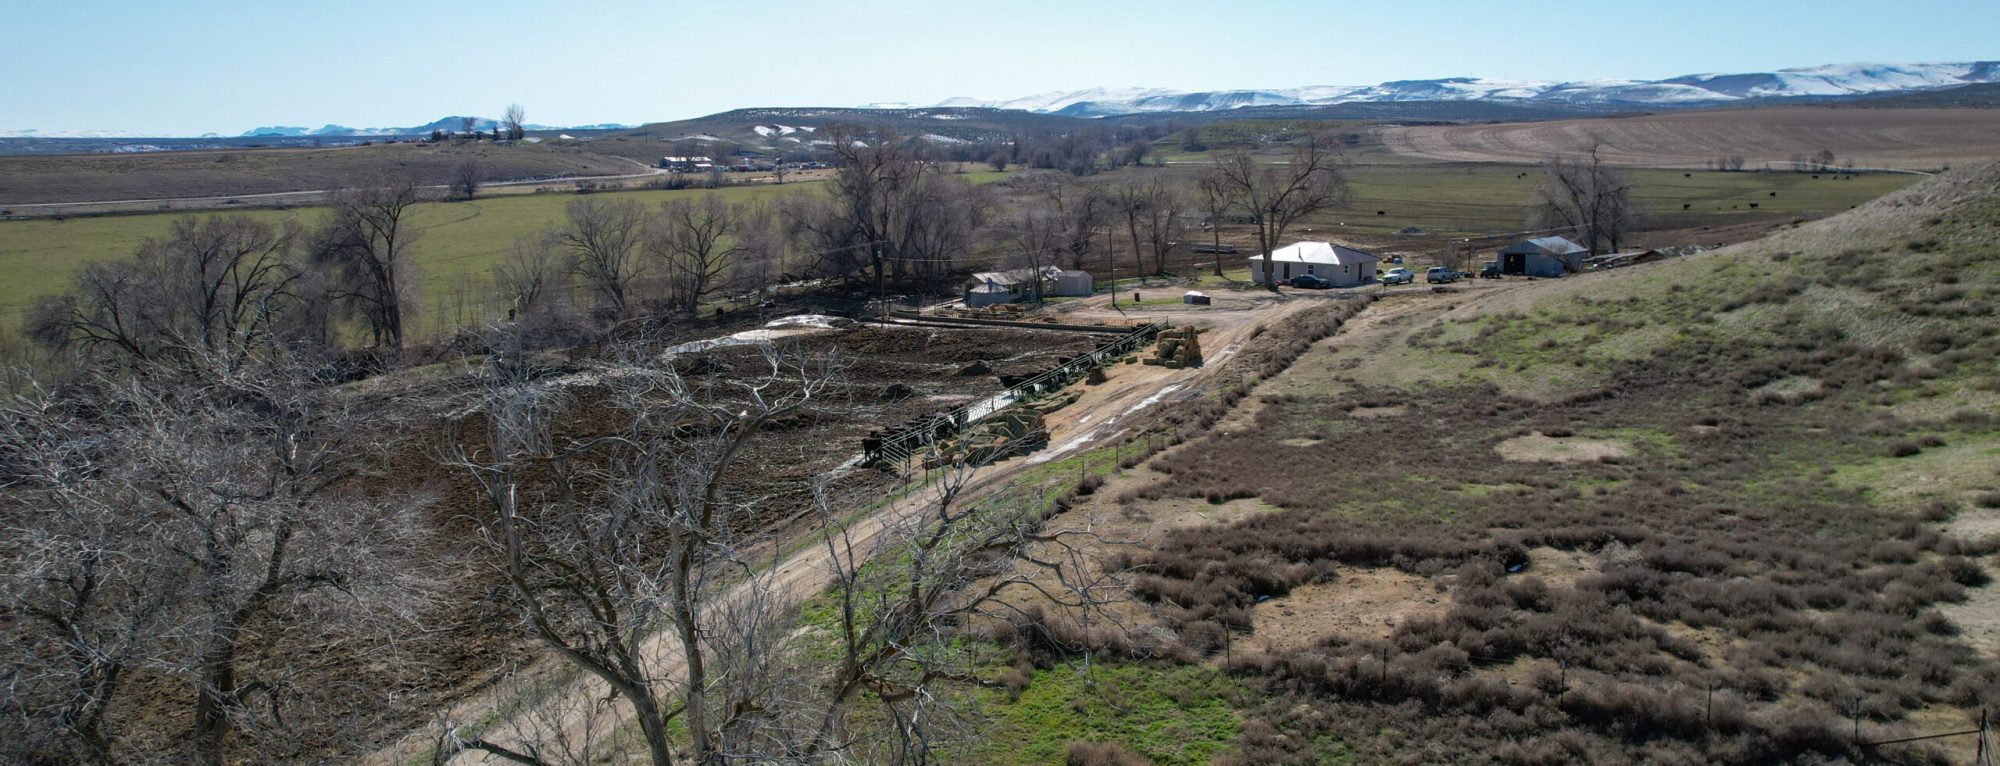 Adrian Cattle Ranch Overview